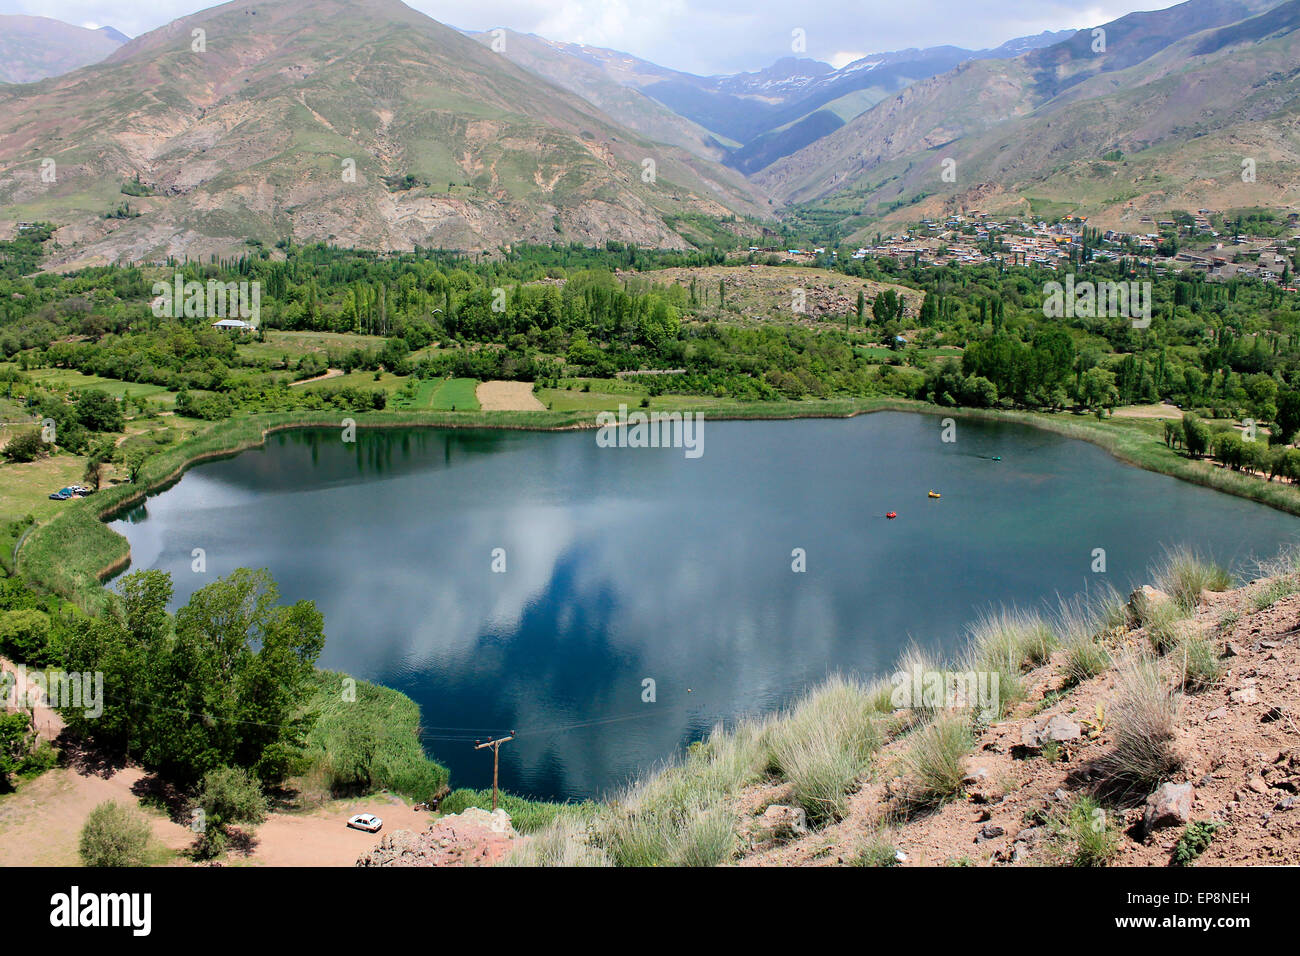 spring in a blue lake surrounded by mountains, Evan lake, Qazvin, Iran Stock Photo